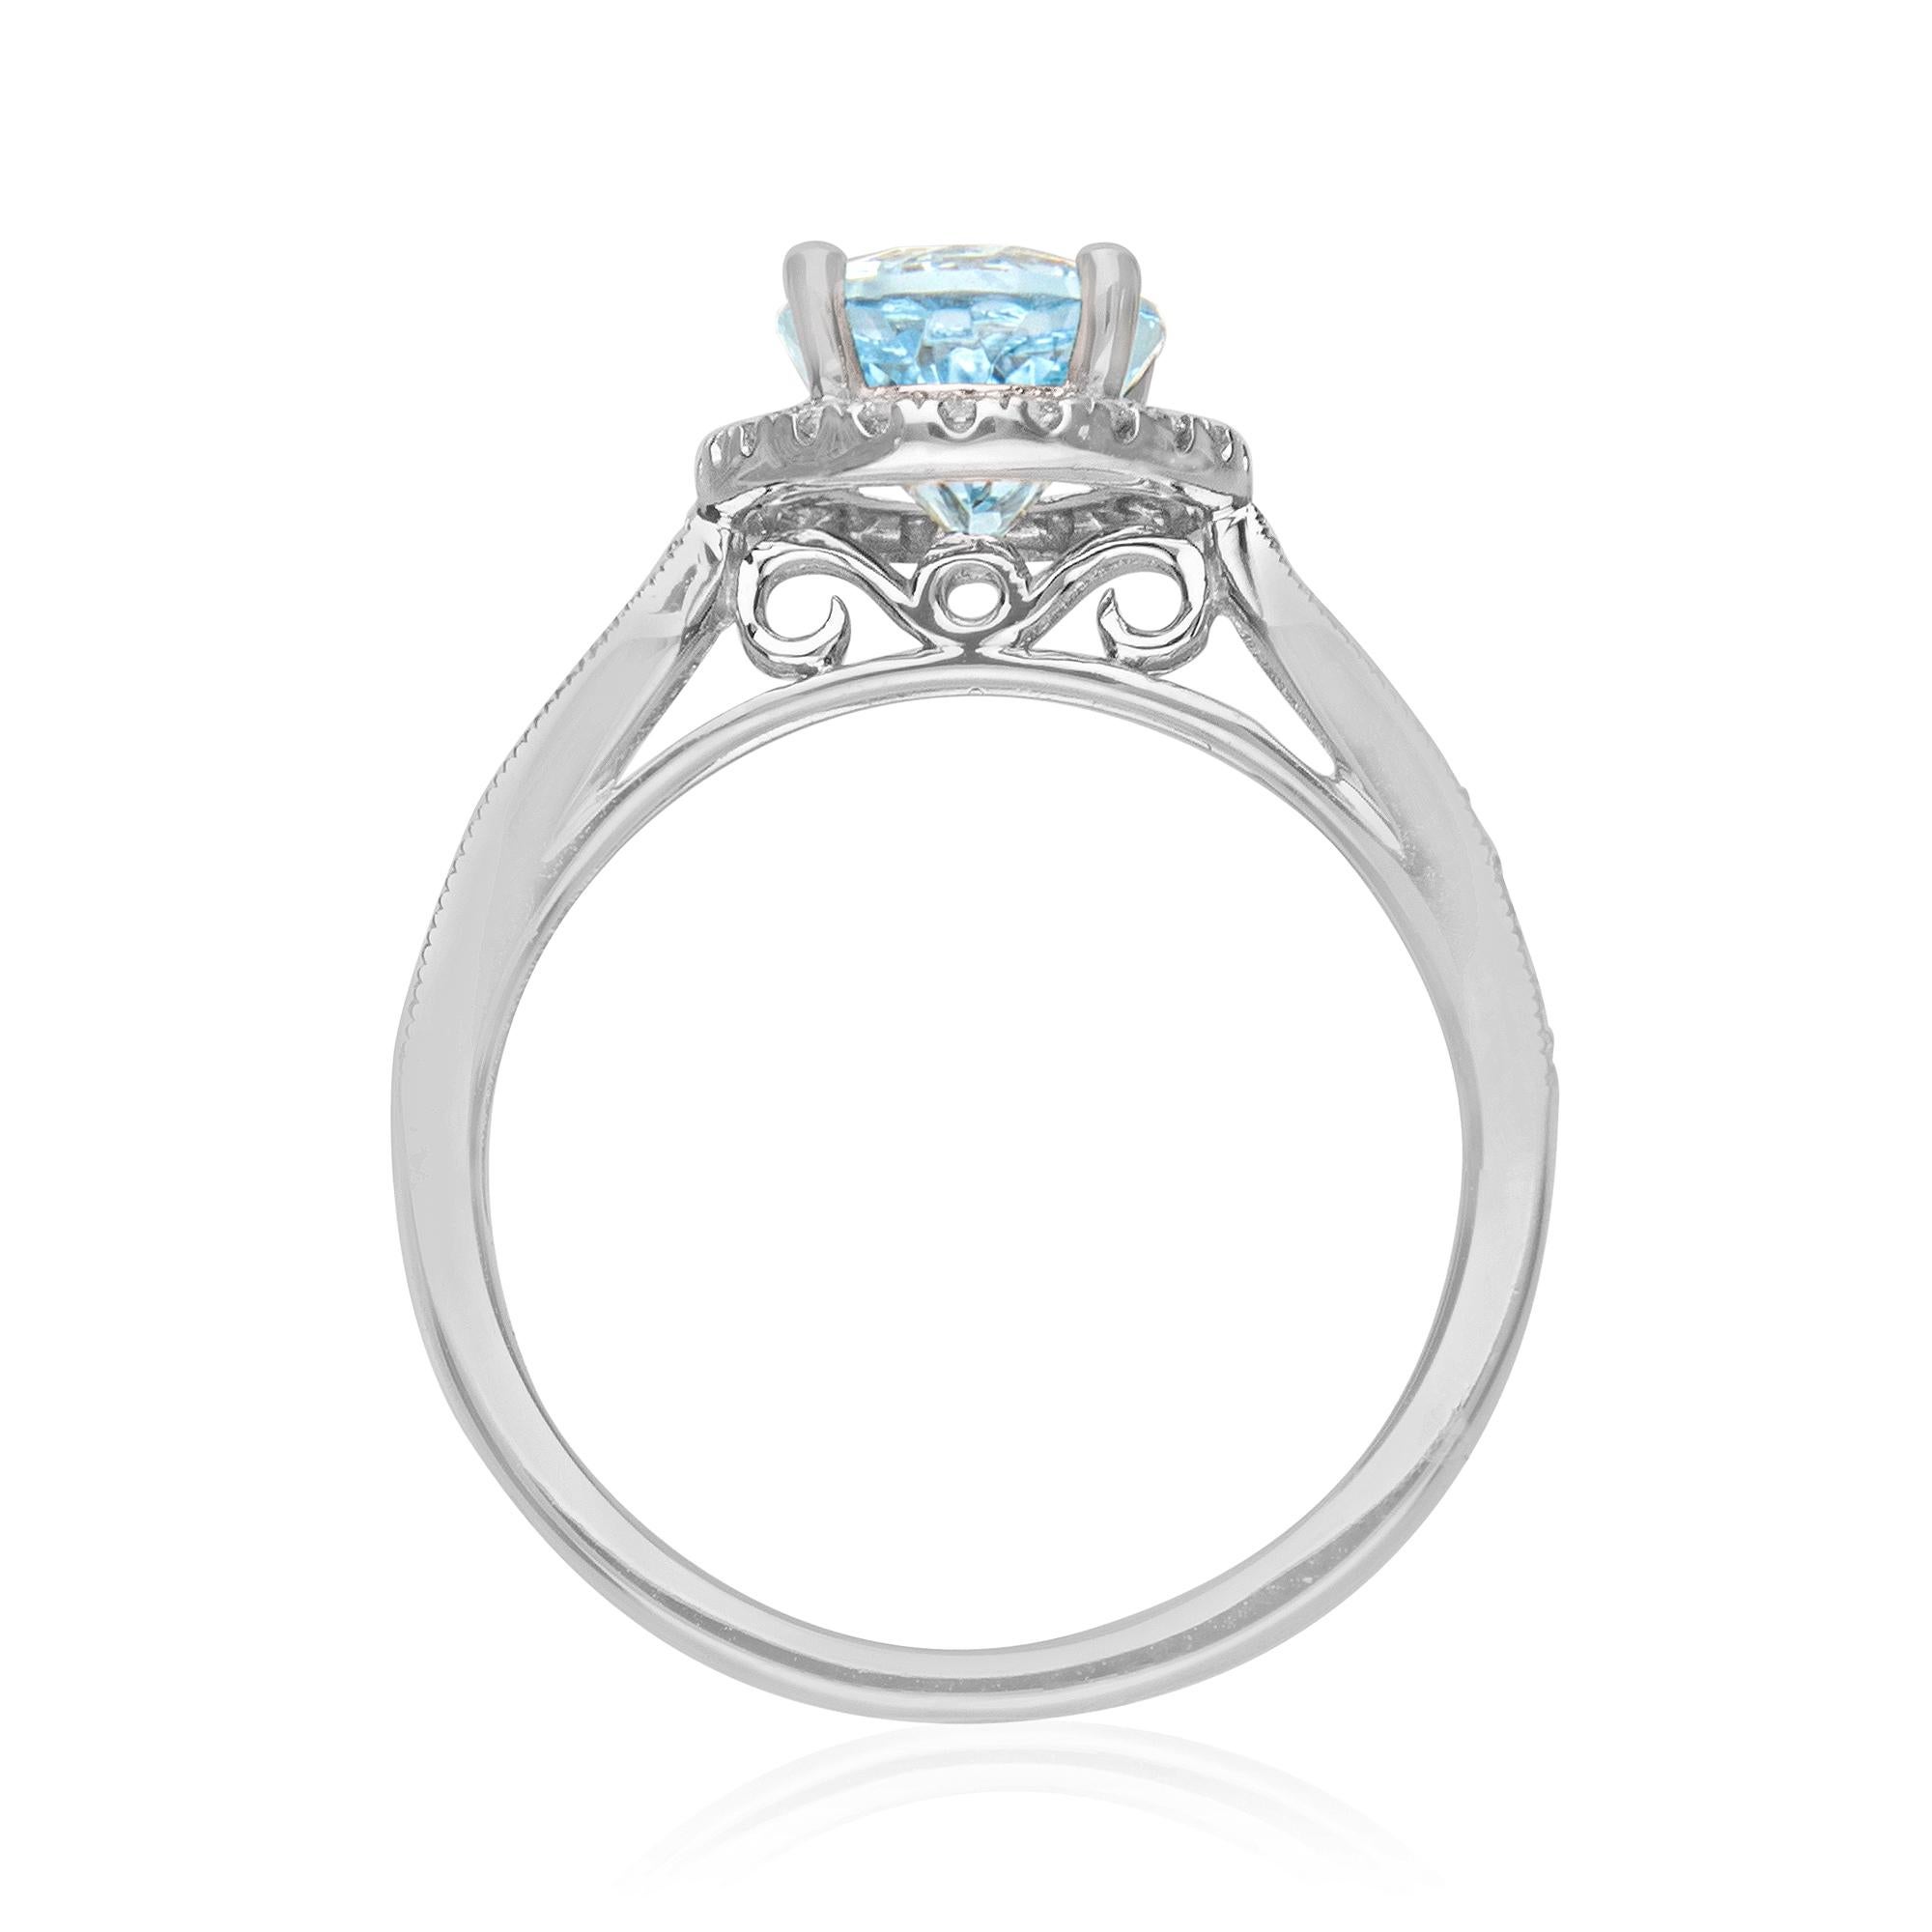 Oval Cut 1.71 Carat Oval-Cut Aquamarine Diamond Accents 14K White Gold Ring For Sale